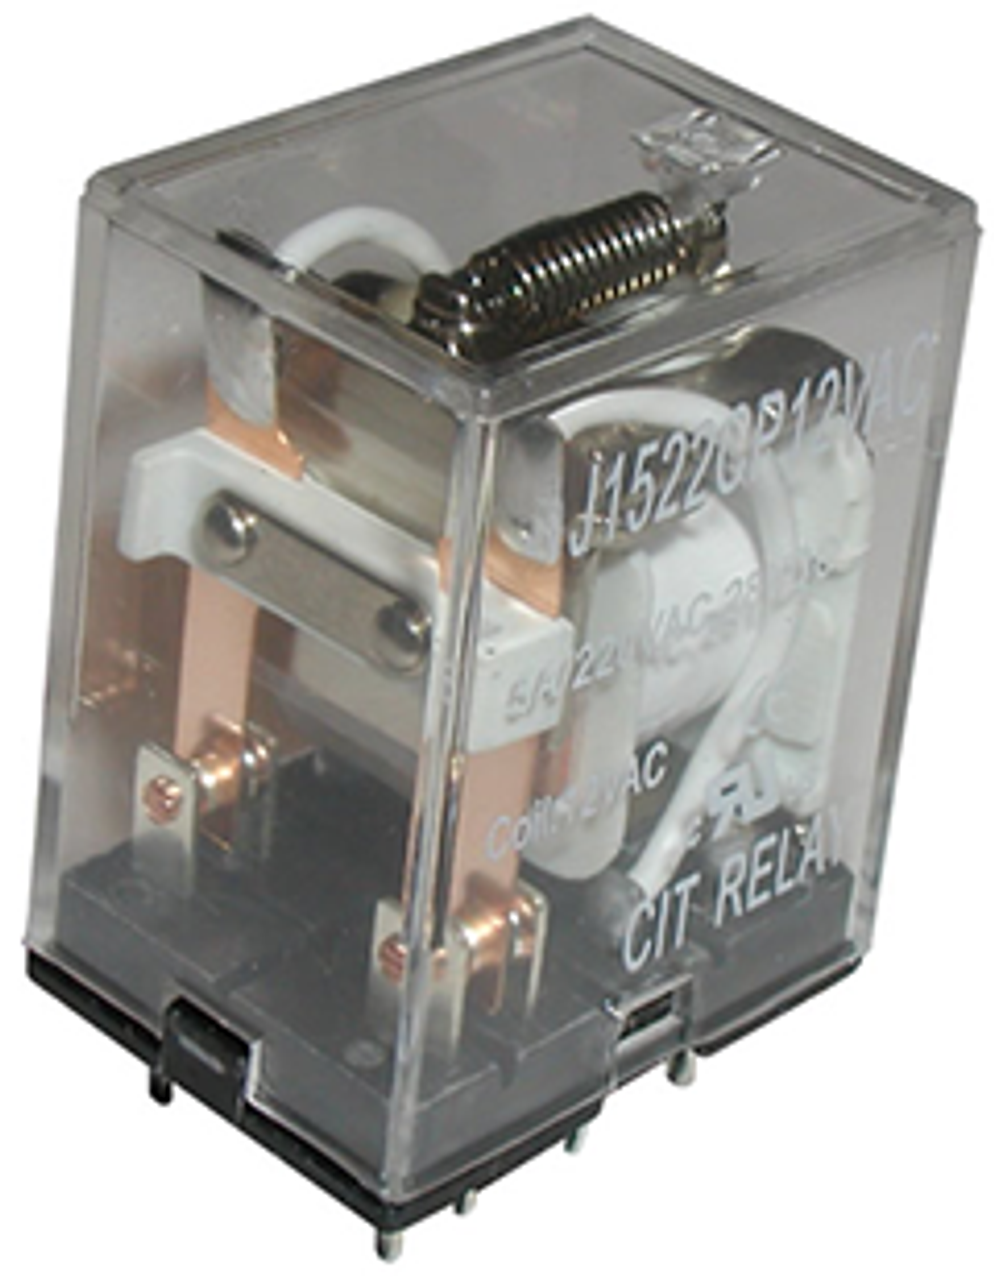 CIT Relay and Switch J1524CF24VDCT Industrial Relays